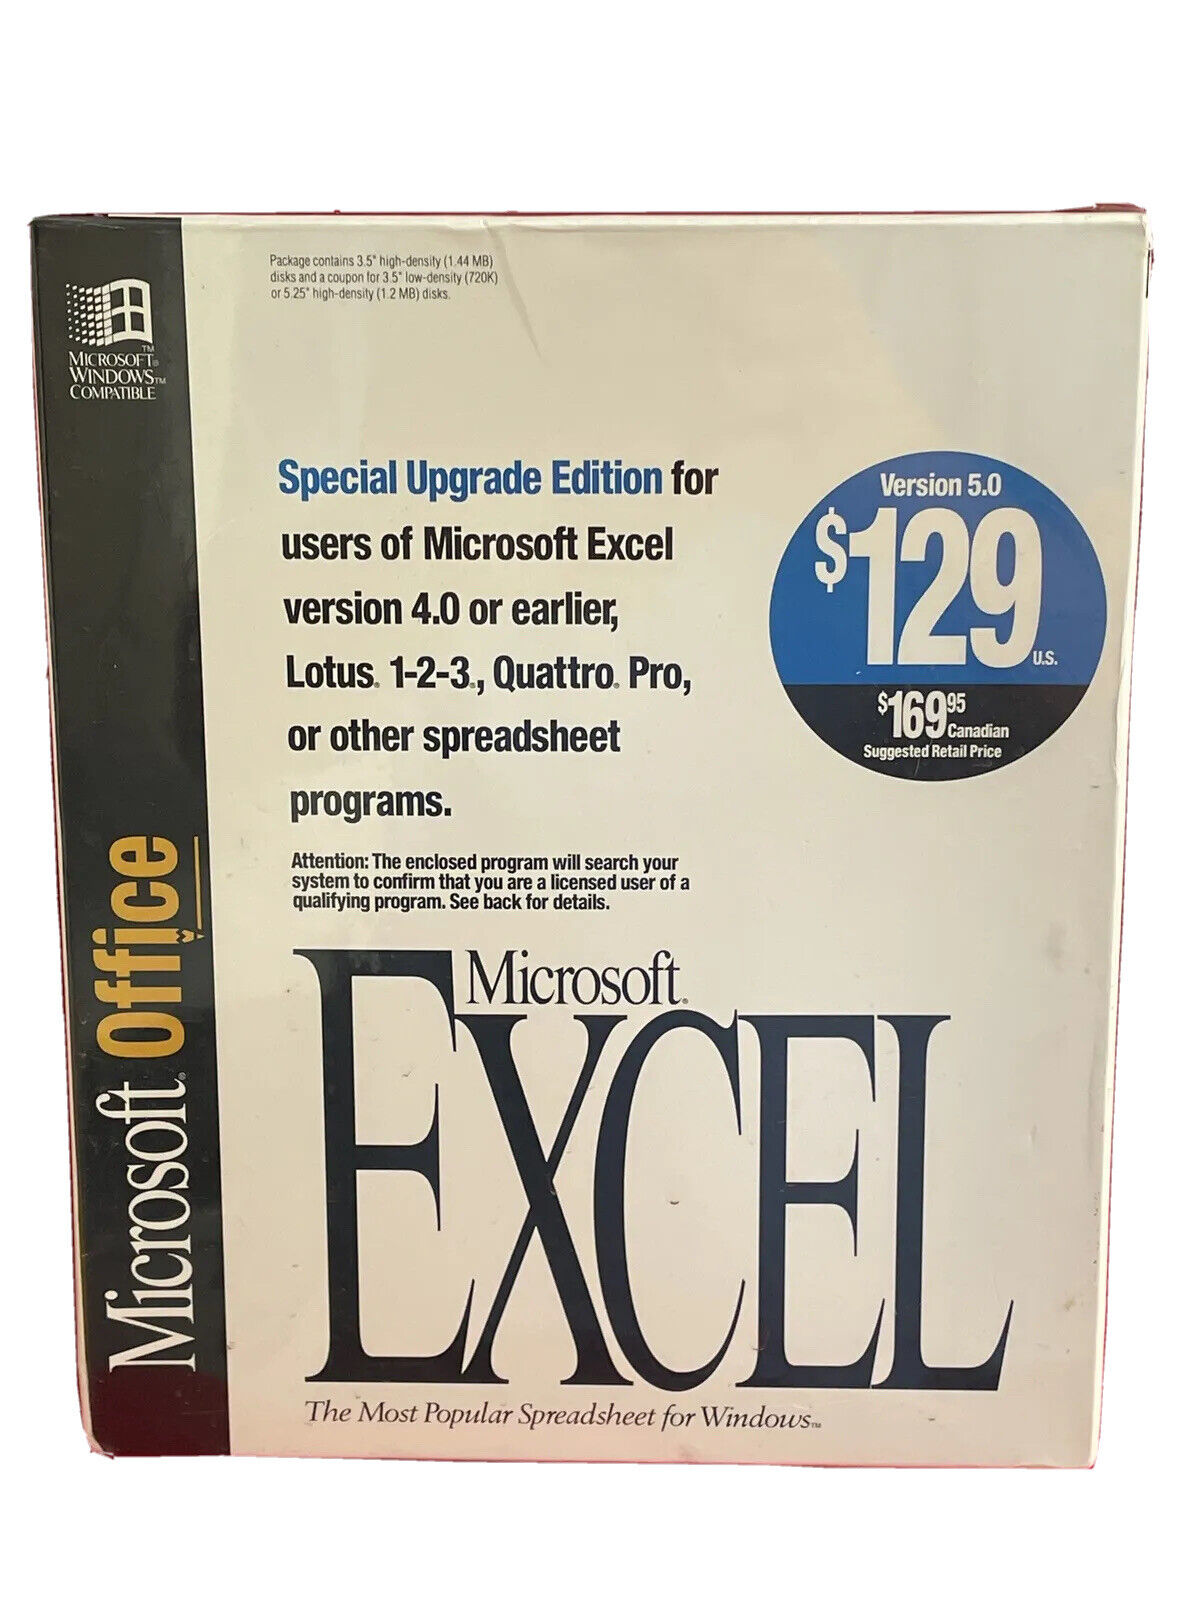 Microsoft Excel 5.0 Upgrade Edition for Windows 3.1 on 3.5